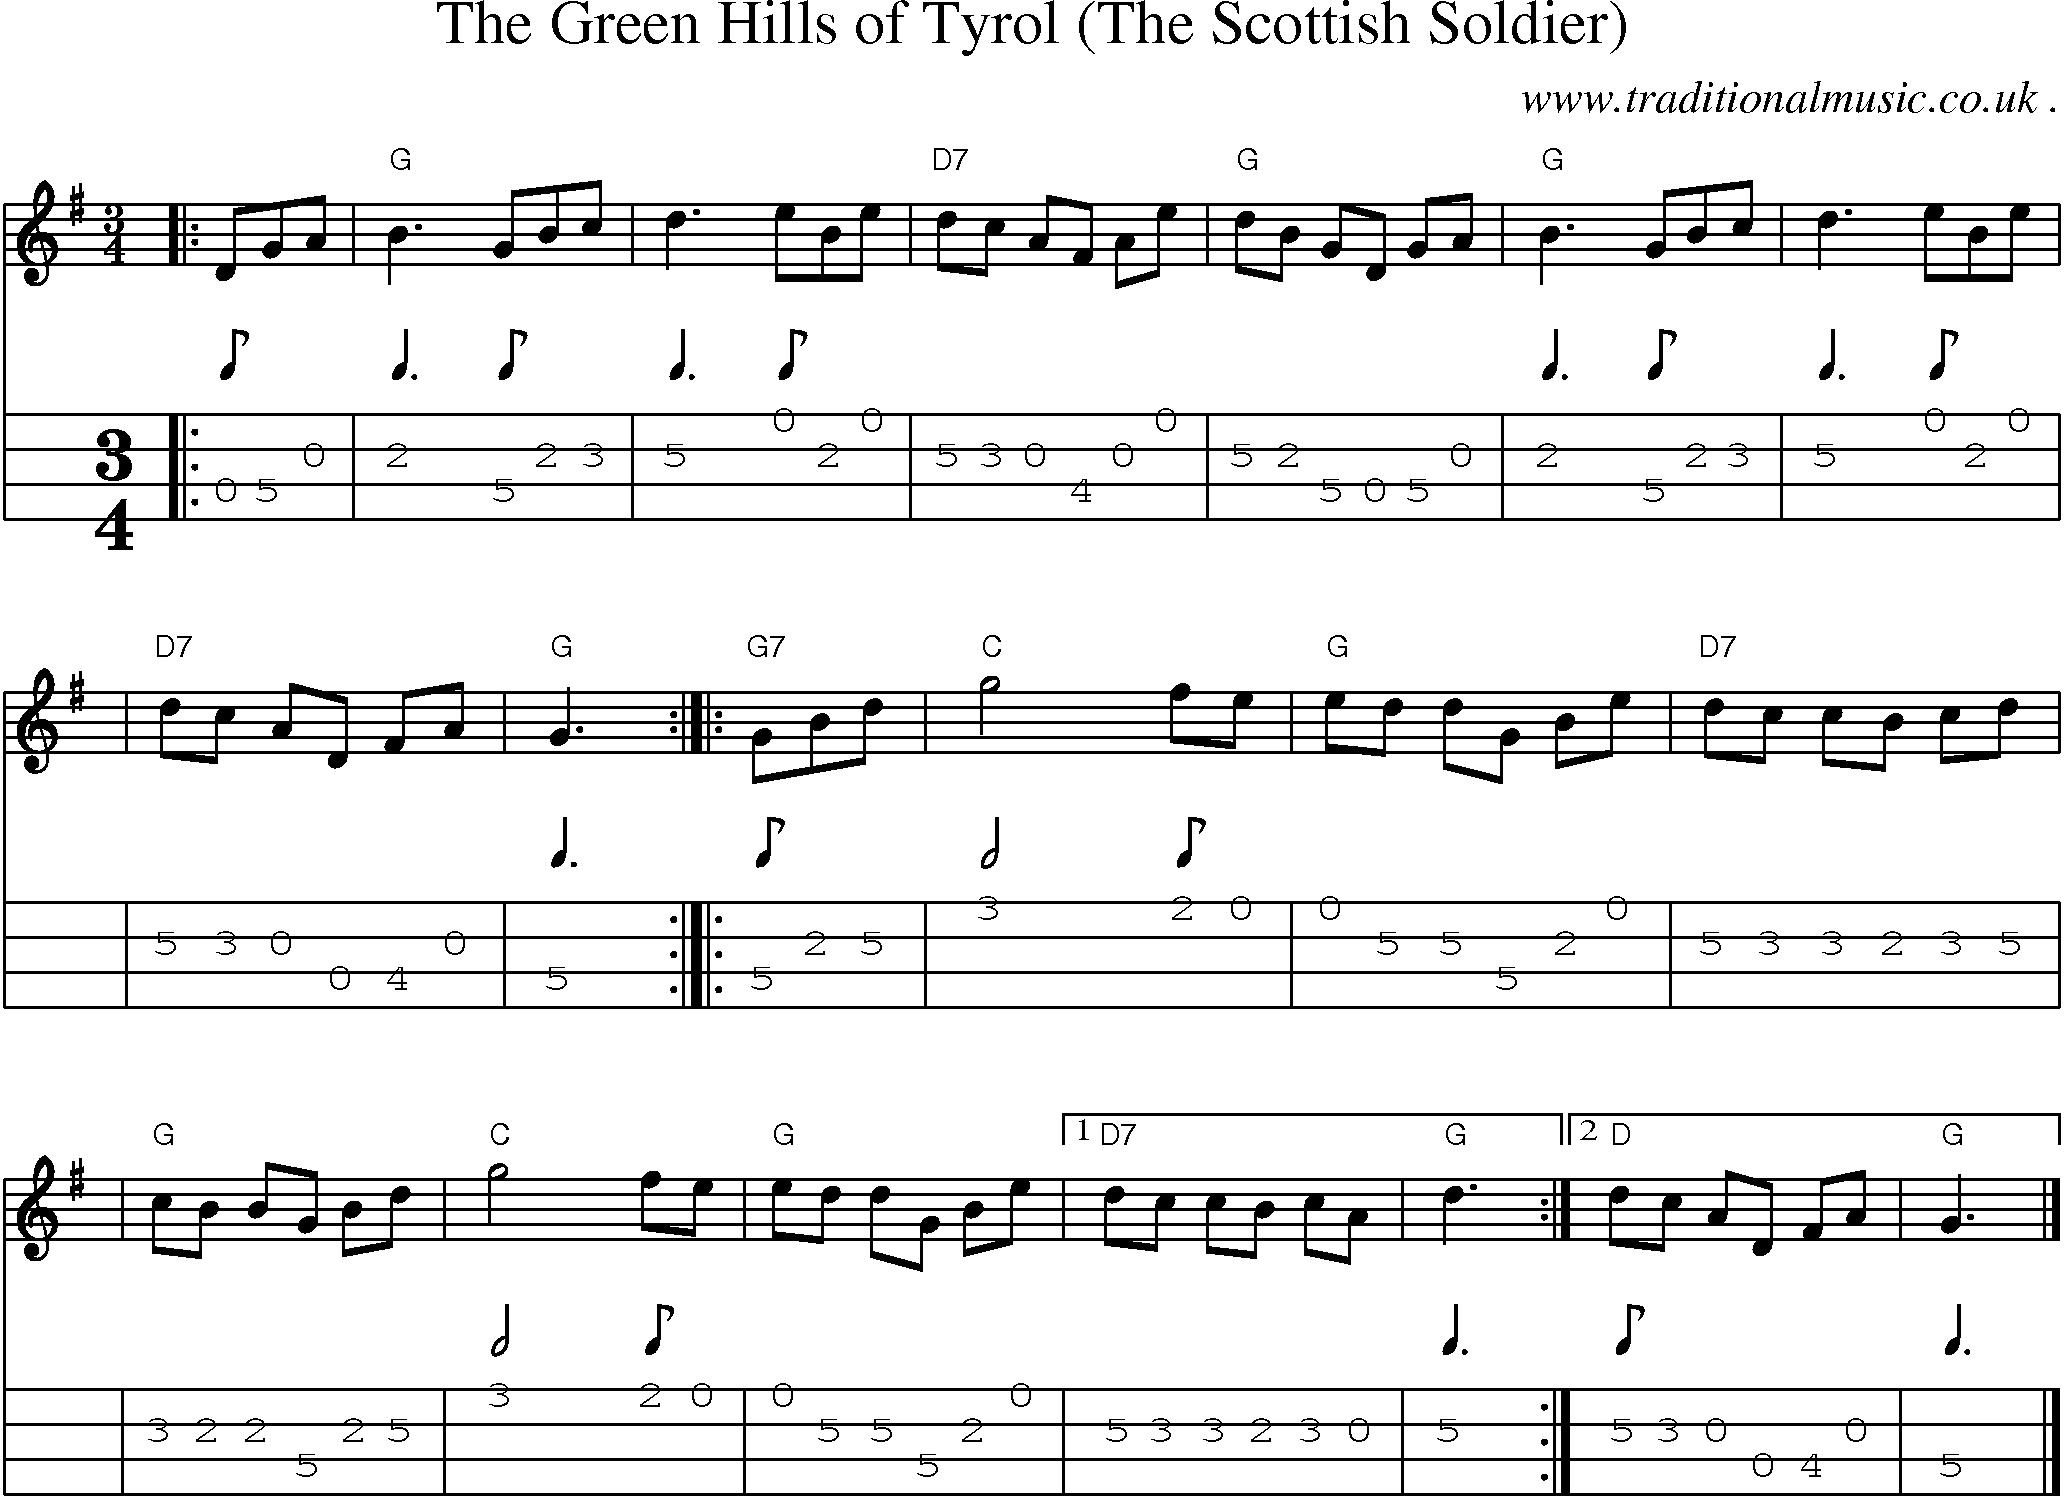 Sheet-music  score, Chords and Mandolin Tabs for The Green Hills Of Tyrol The Scottish Soldier